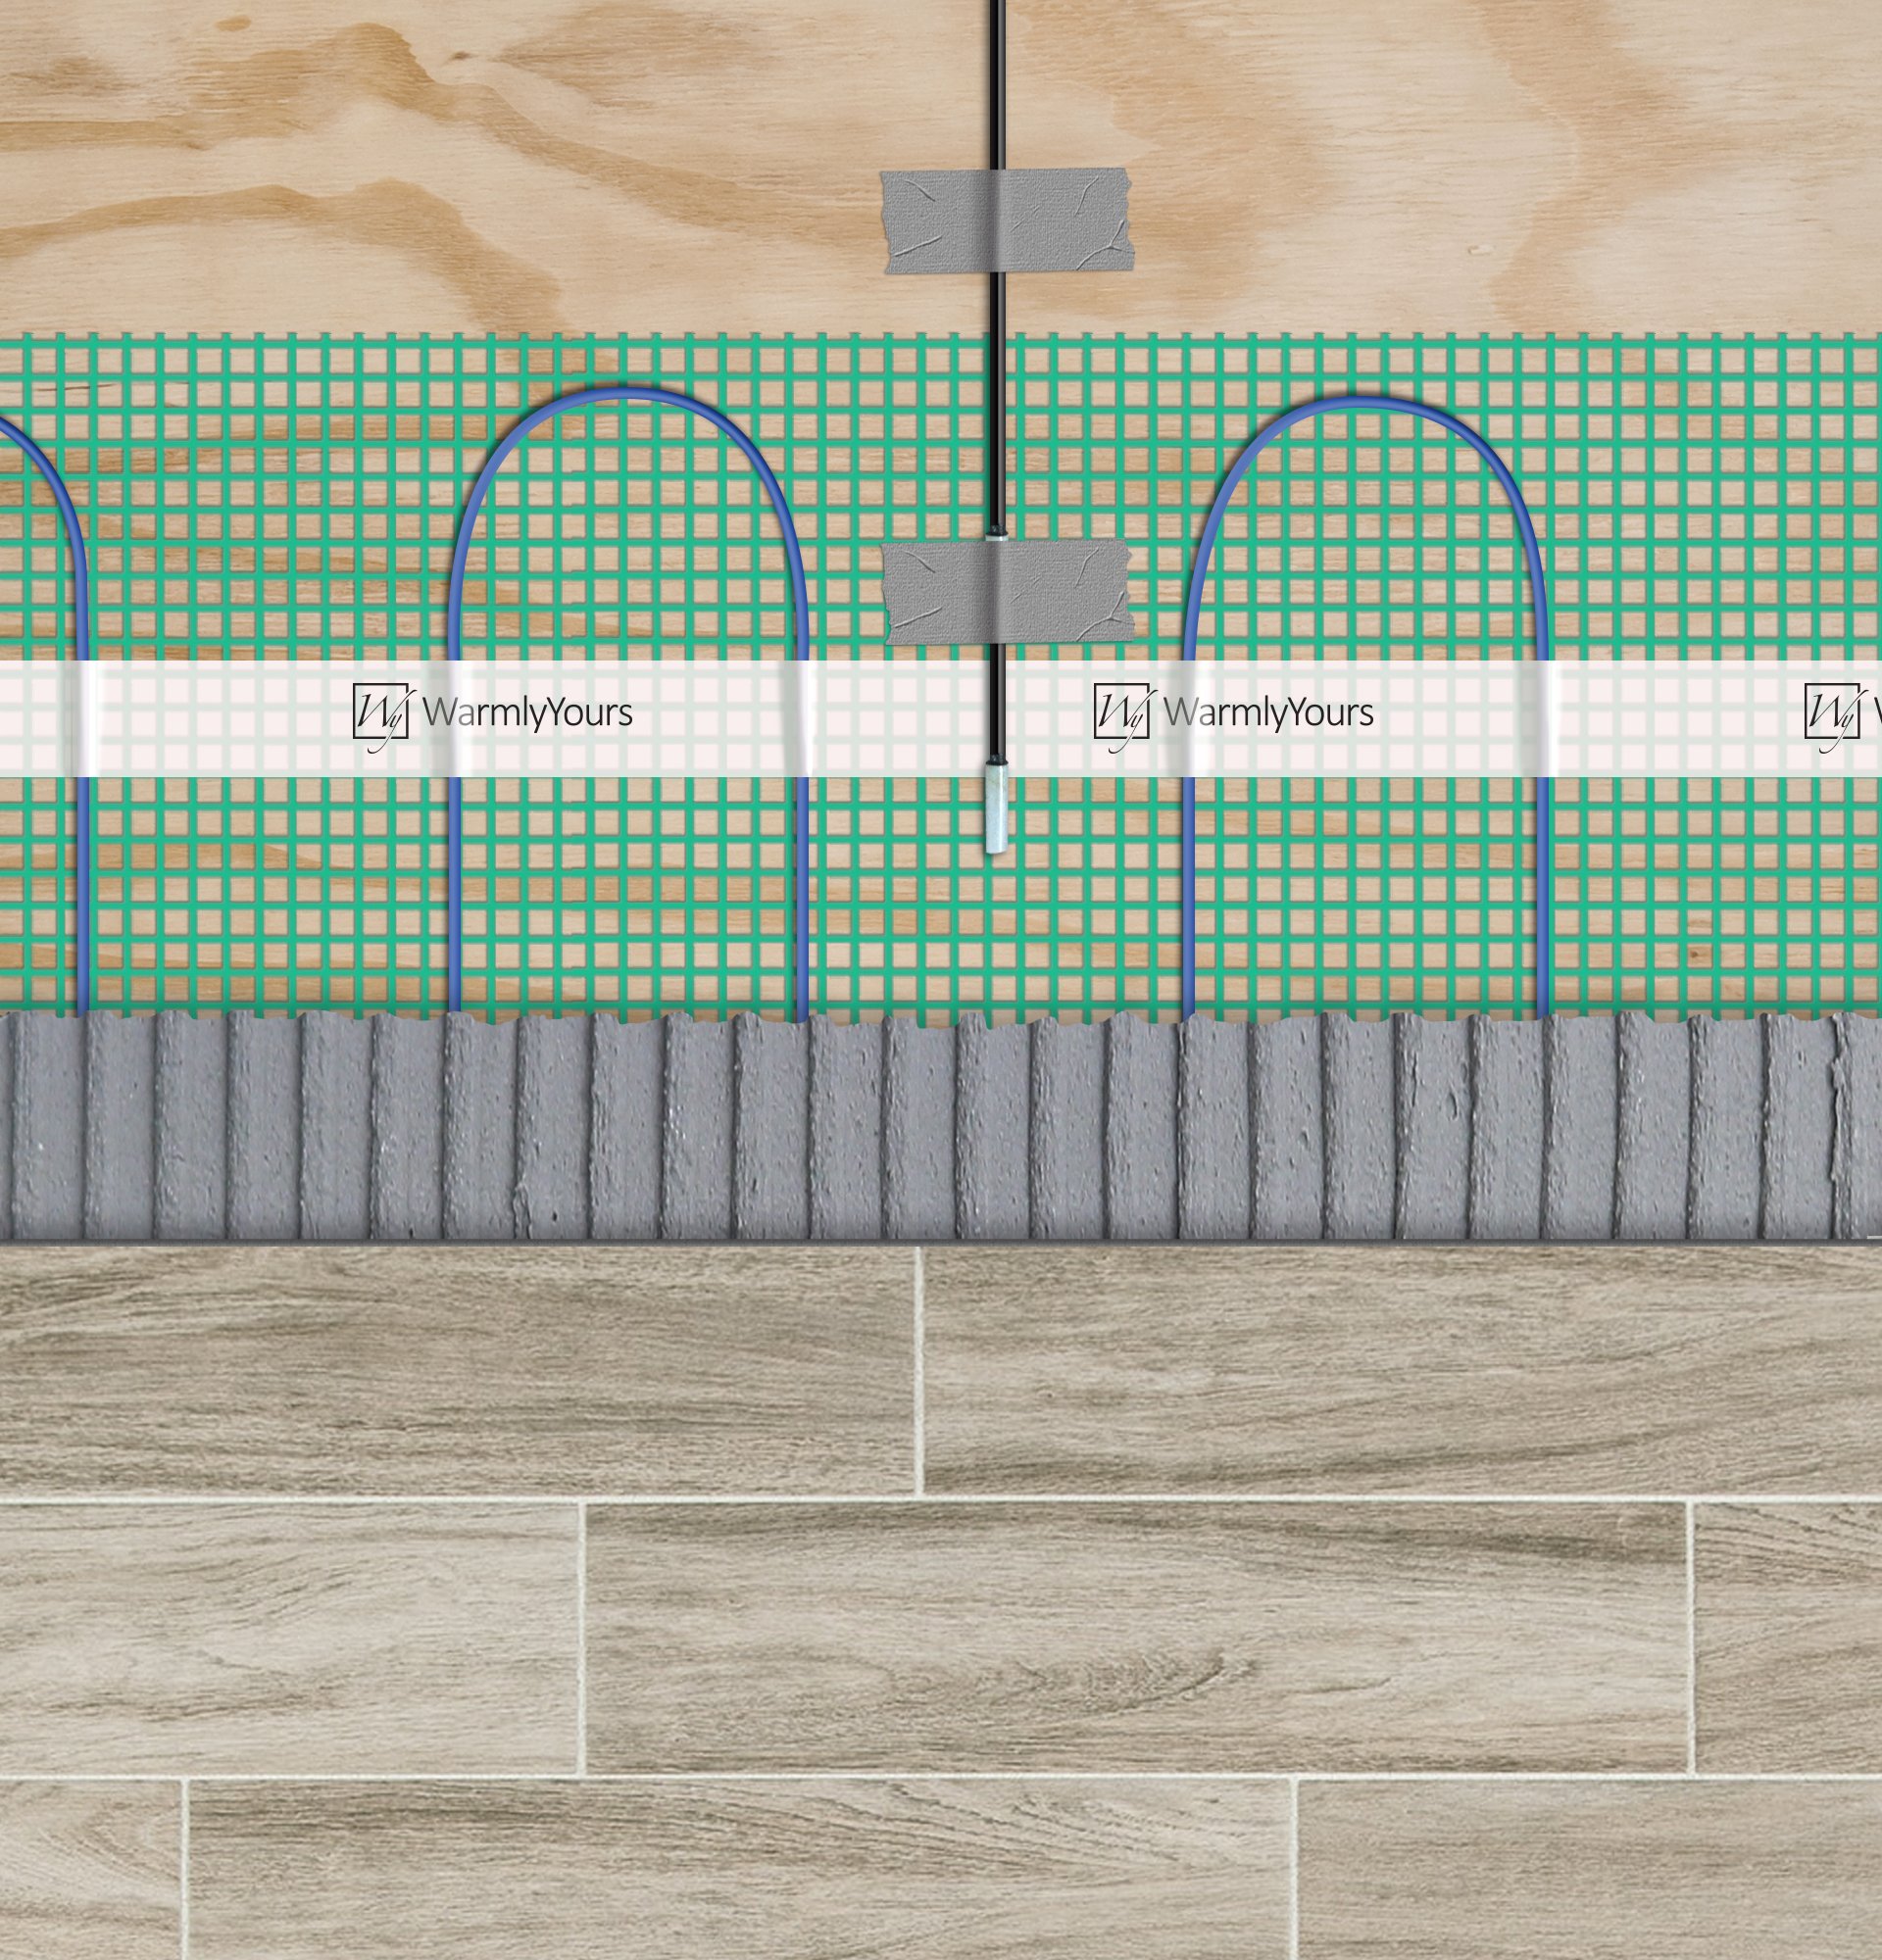 How To Install Floor Heating Under Tile Warmlyyours